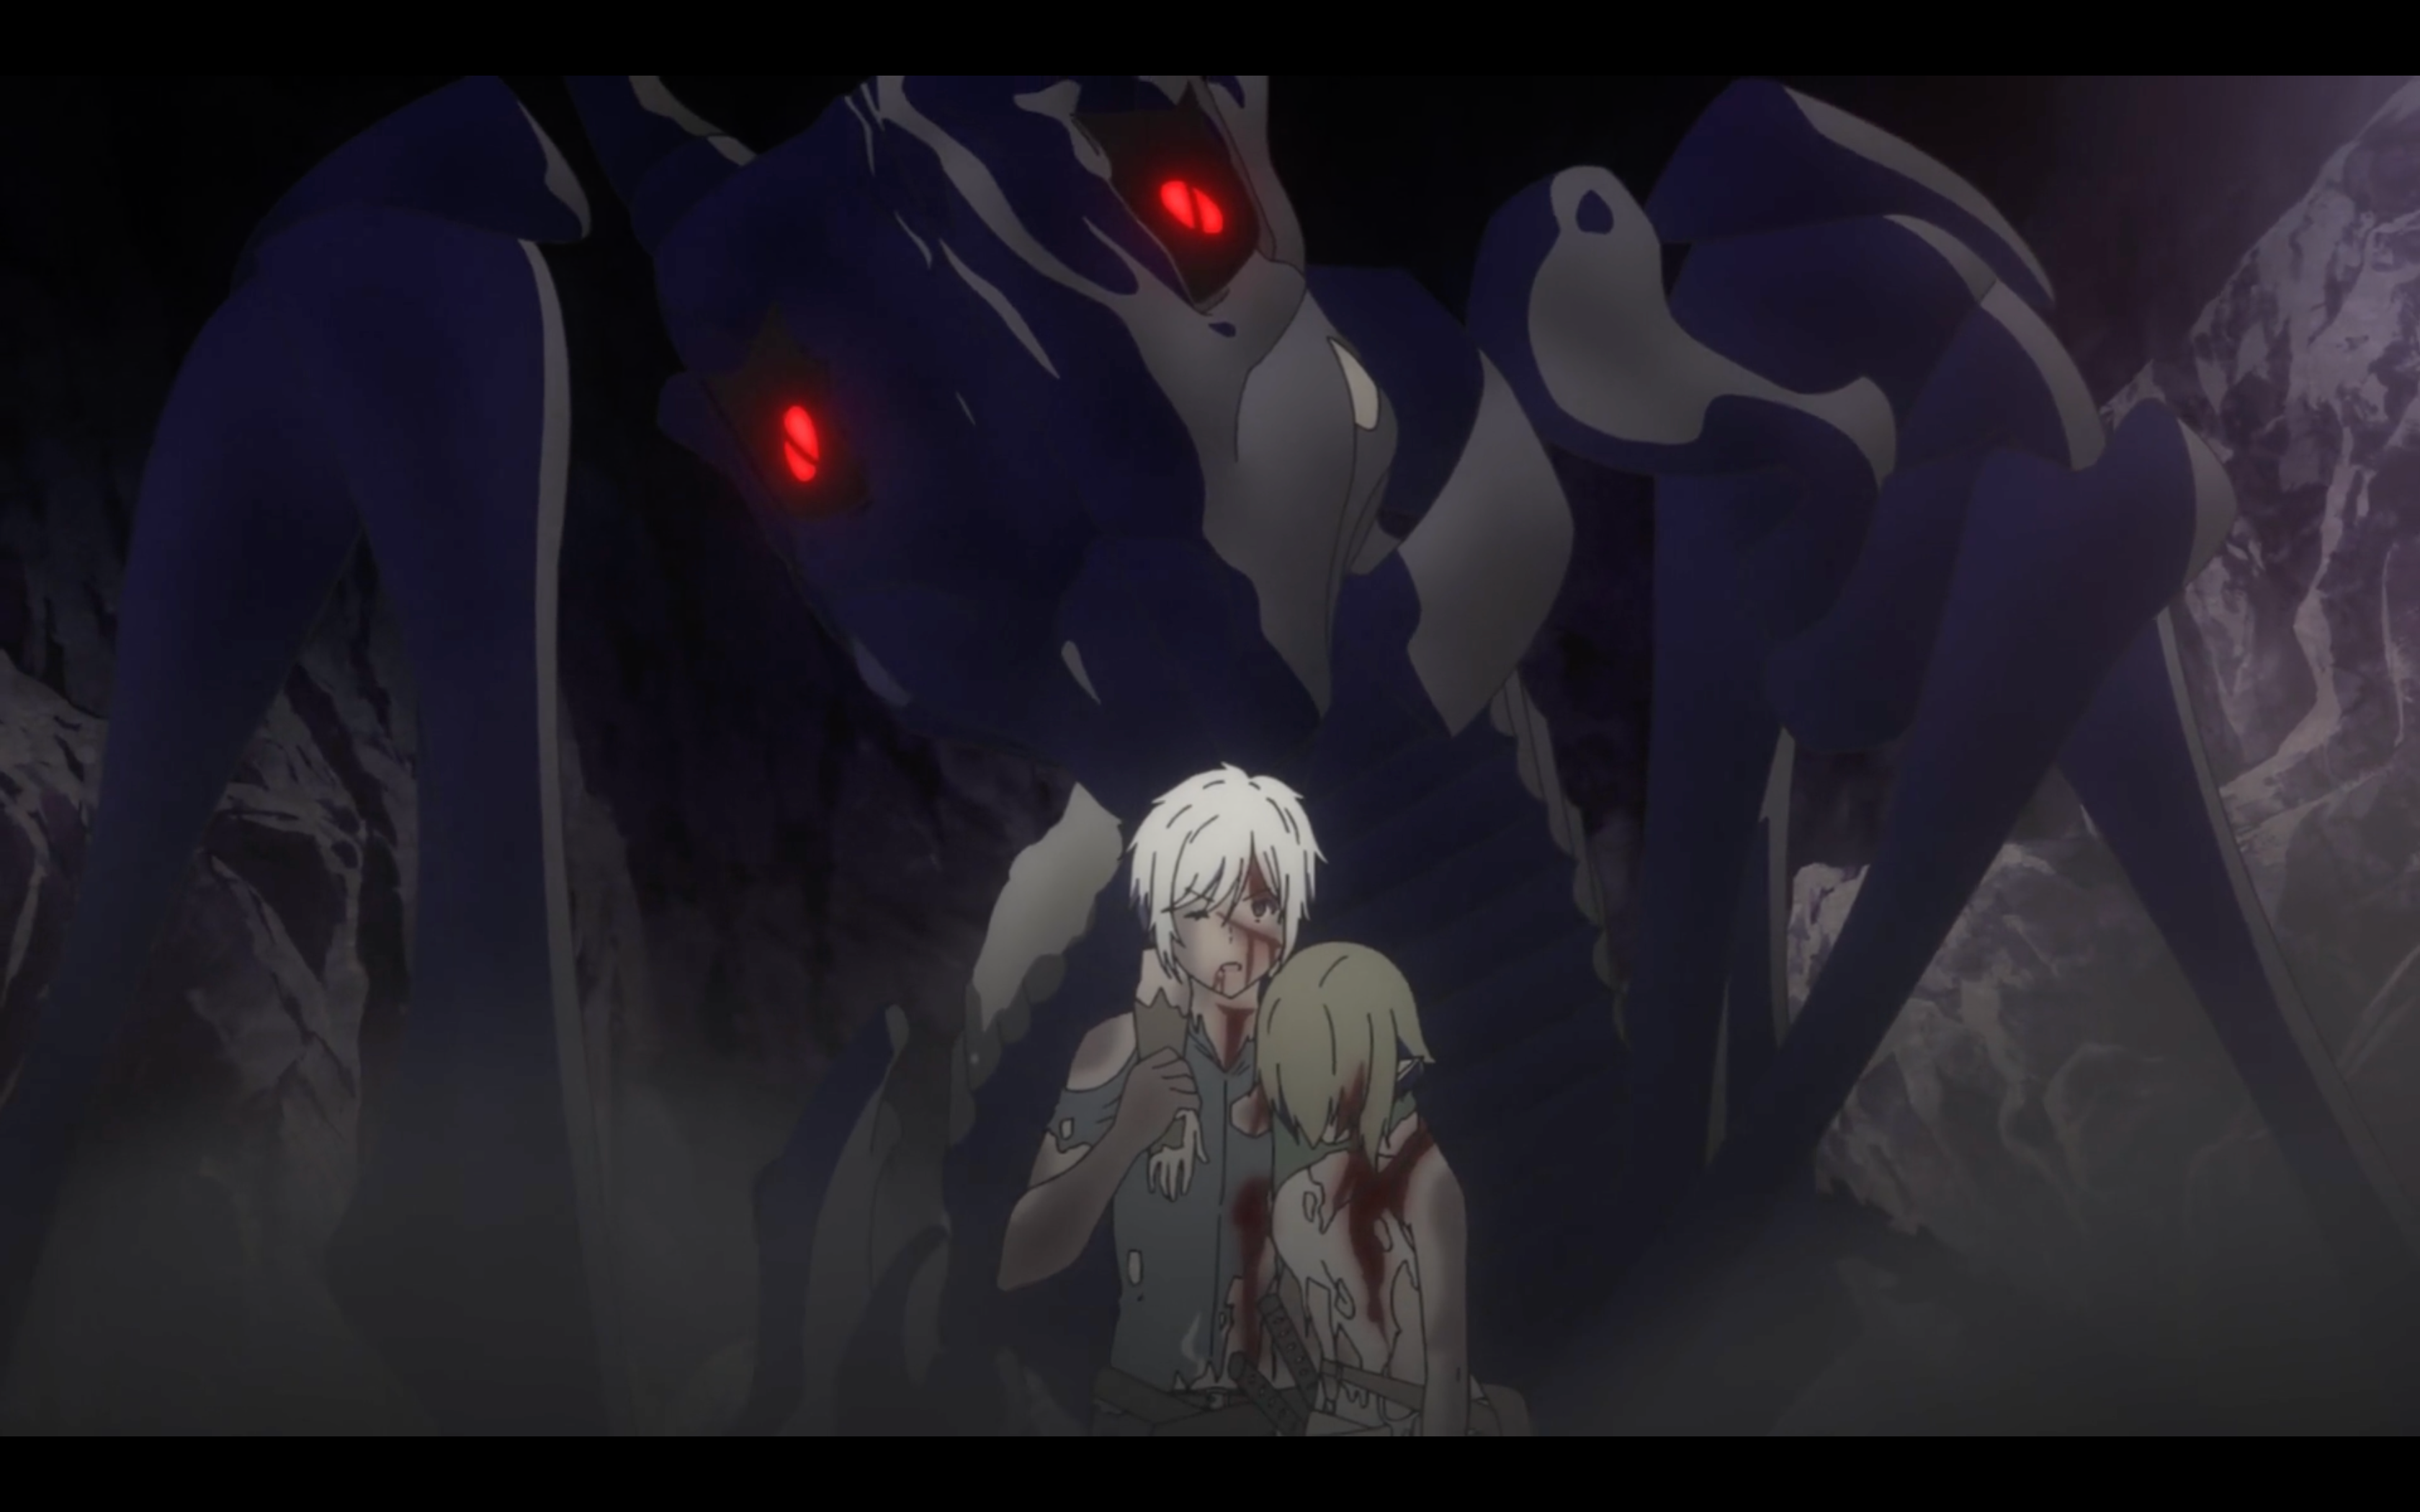 DanMachi (Is It Wrong To Try To Pick Up Girls In A Dungeon) Juggernaut finds Bell and Ryuu